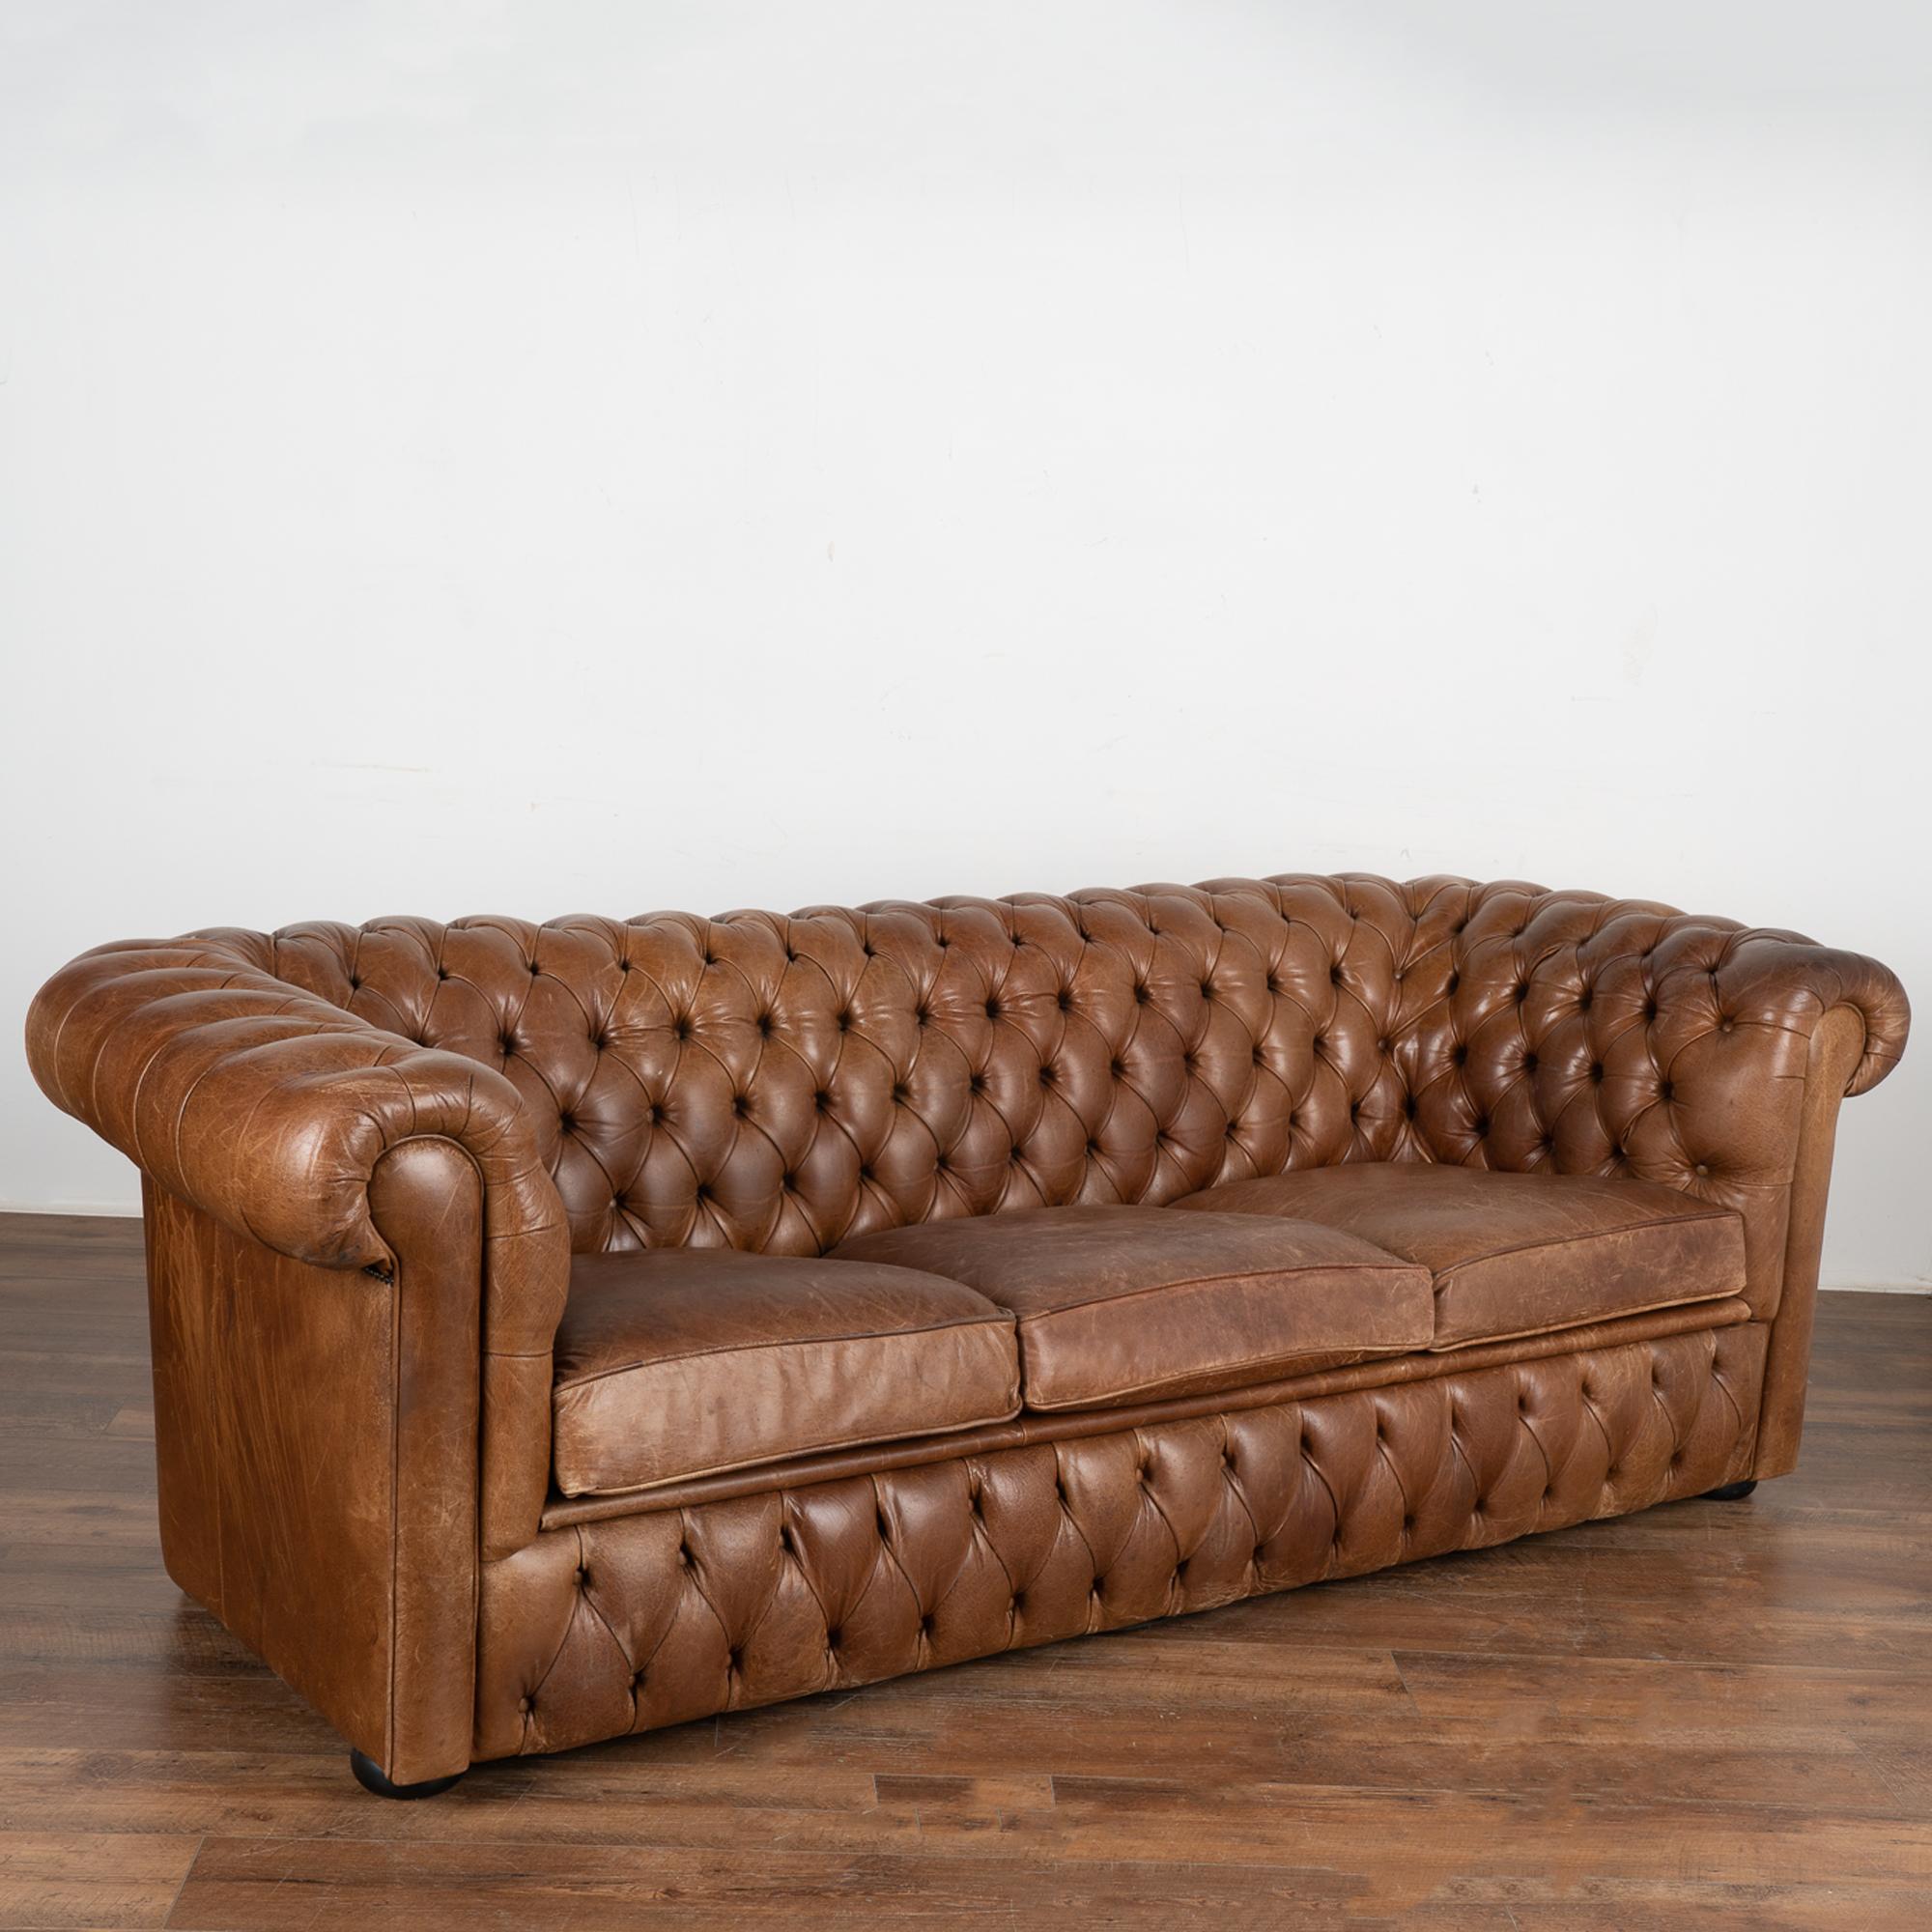 Loaded with character, this three seat sofa packs a vintage punch with the classic lines and tufted back of a classic Chesterfield sofa with self covered buttons and heavy rolled arms.
The vintage brown leather shows typical age related wear seen in